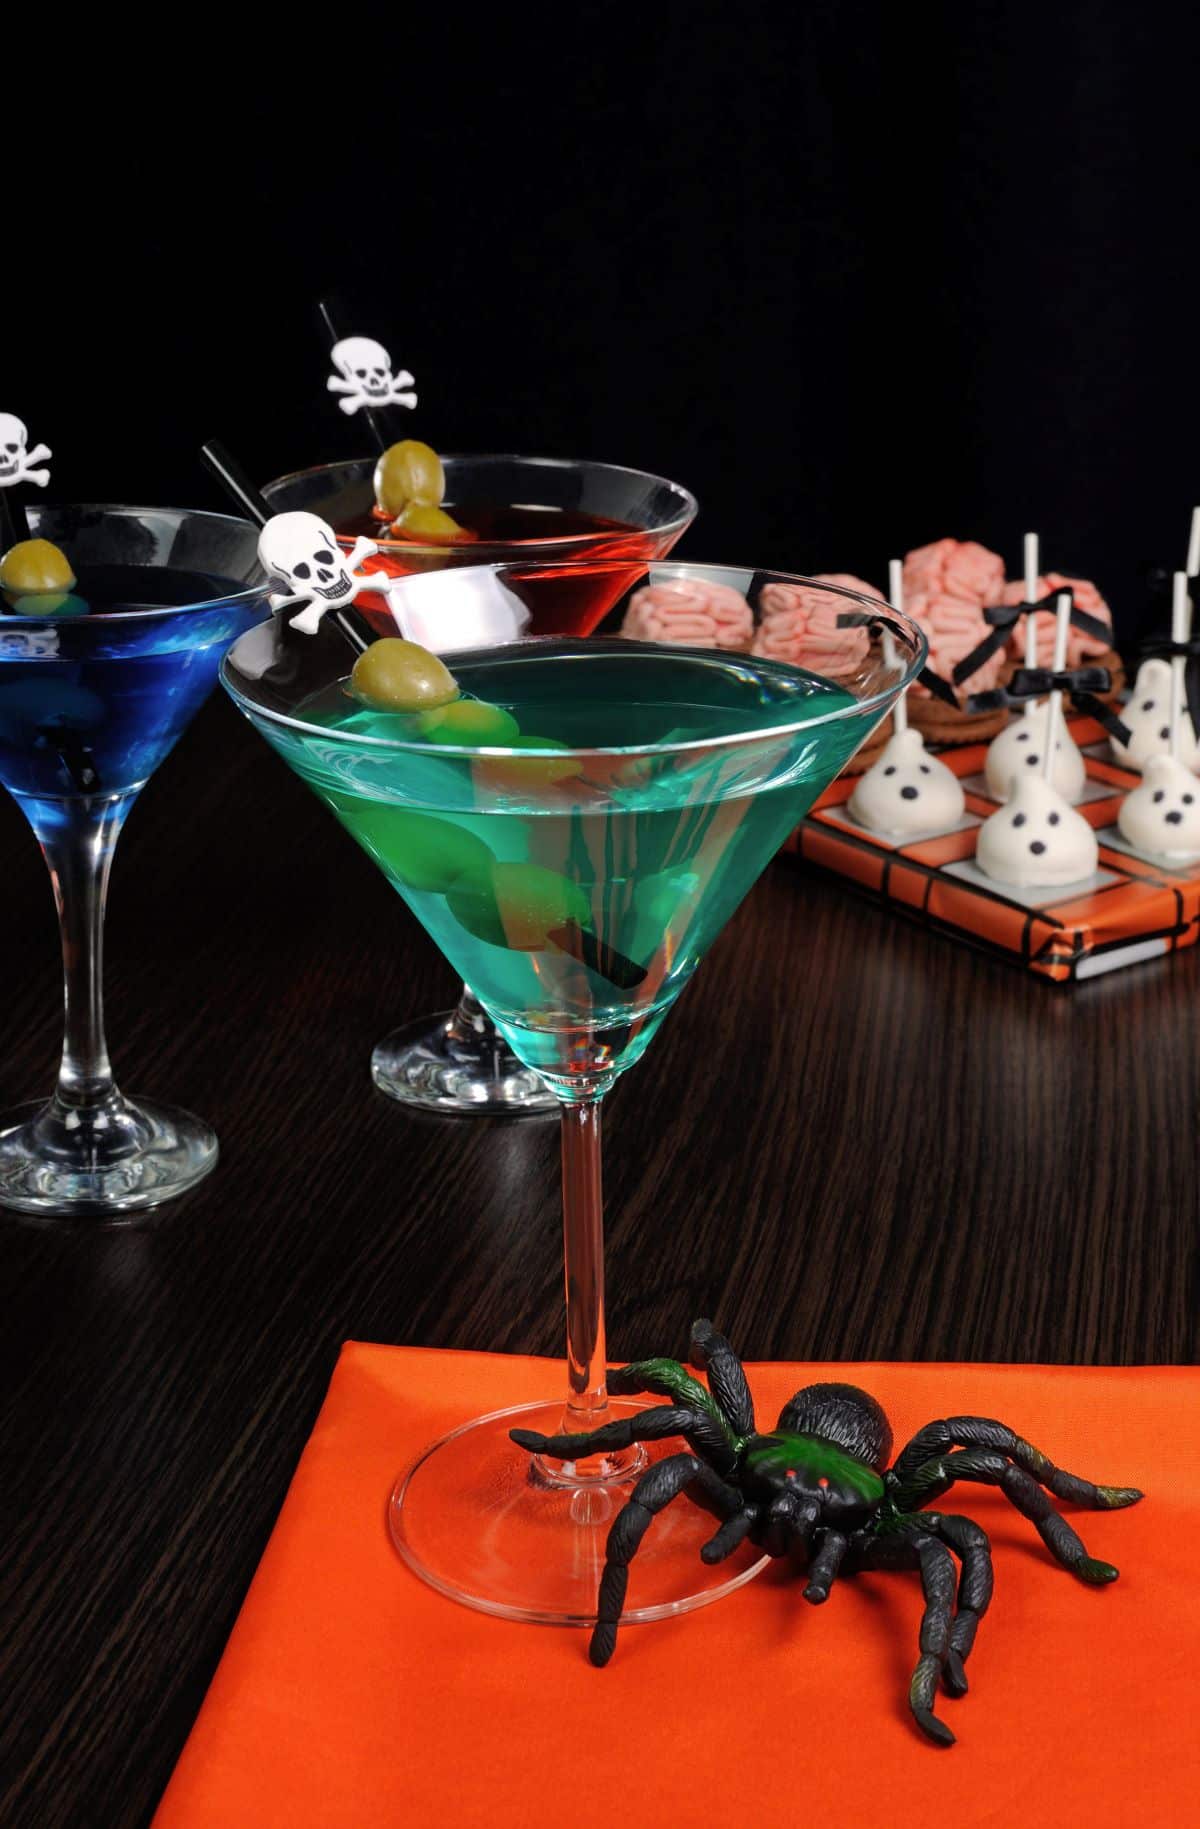 Several colorful halloween cocktails with spider garnishes.